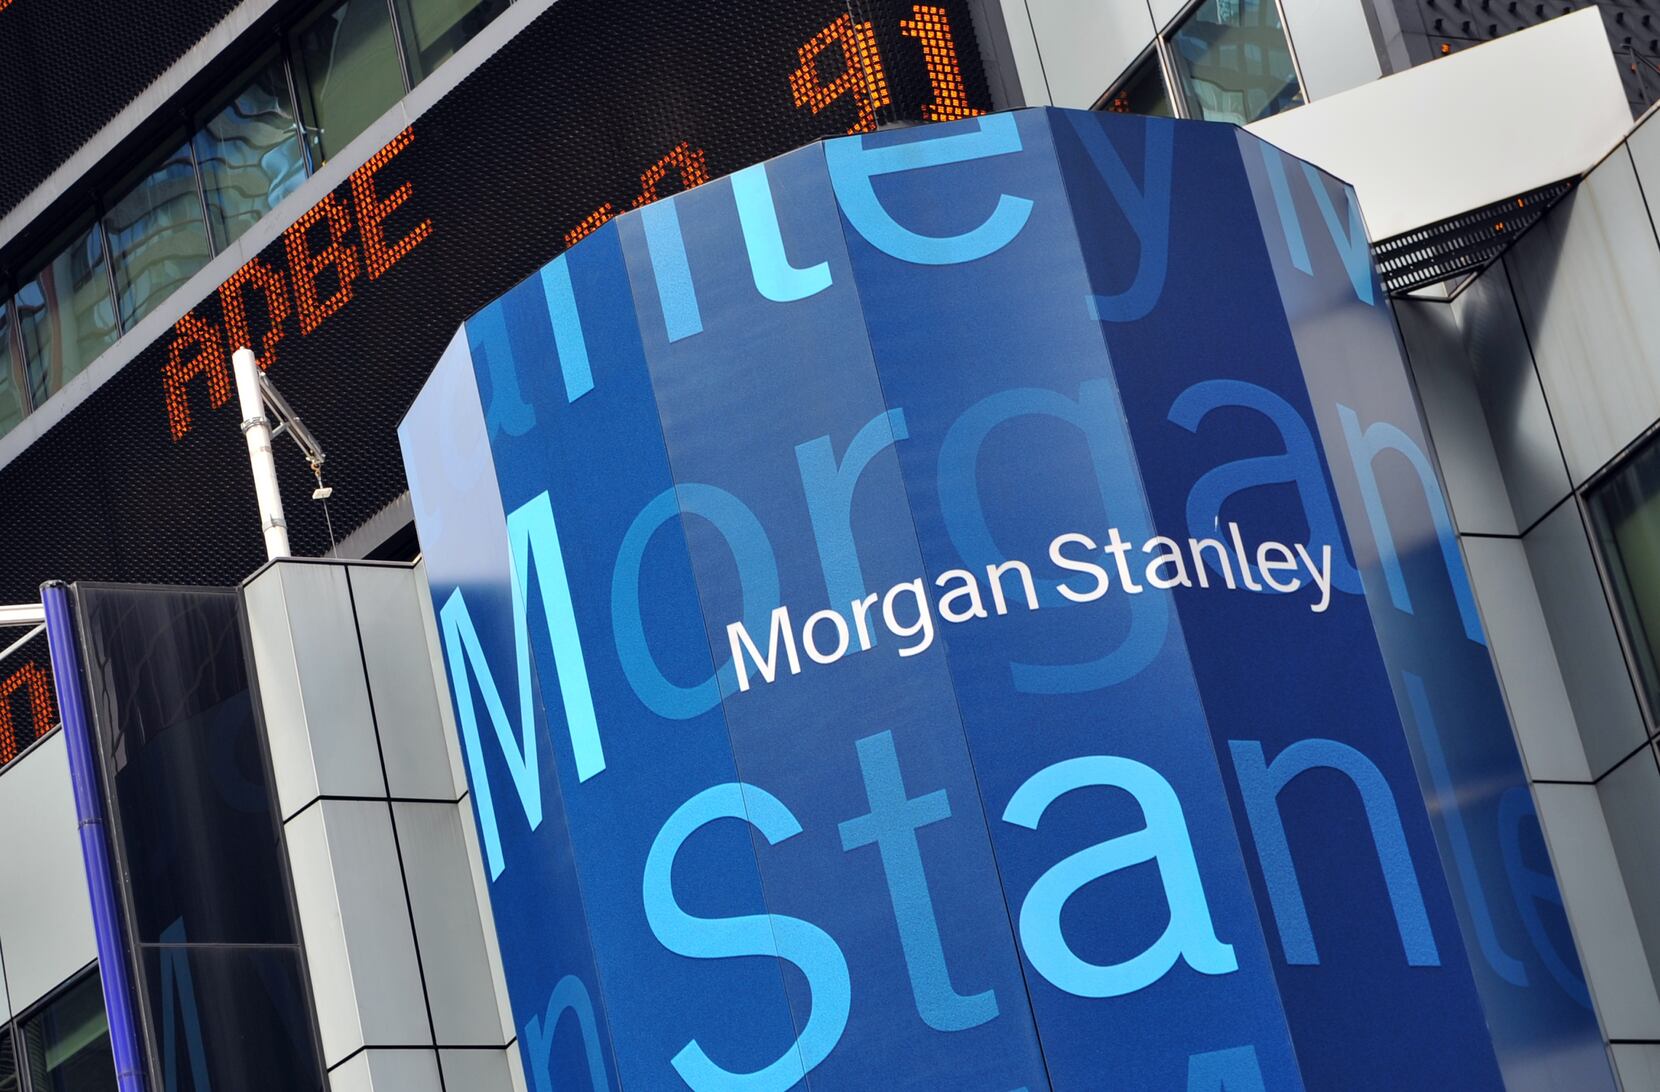 How to get a job at Morgan Stanley: don't fake it